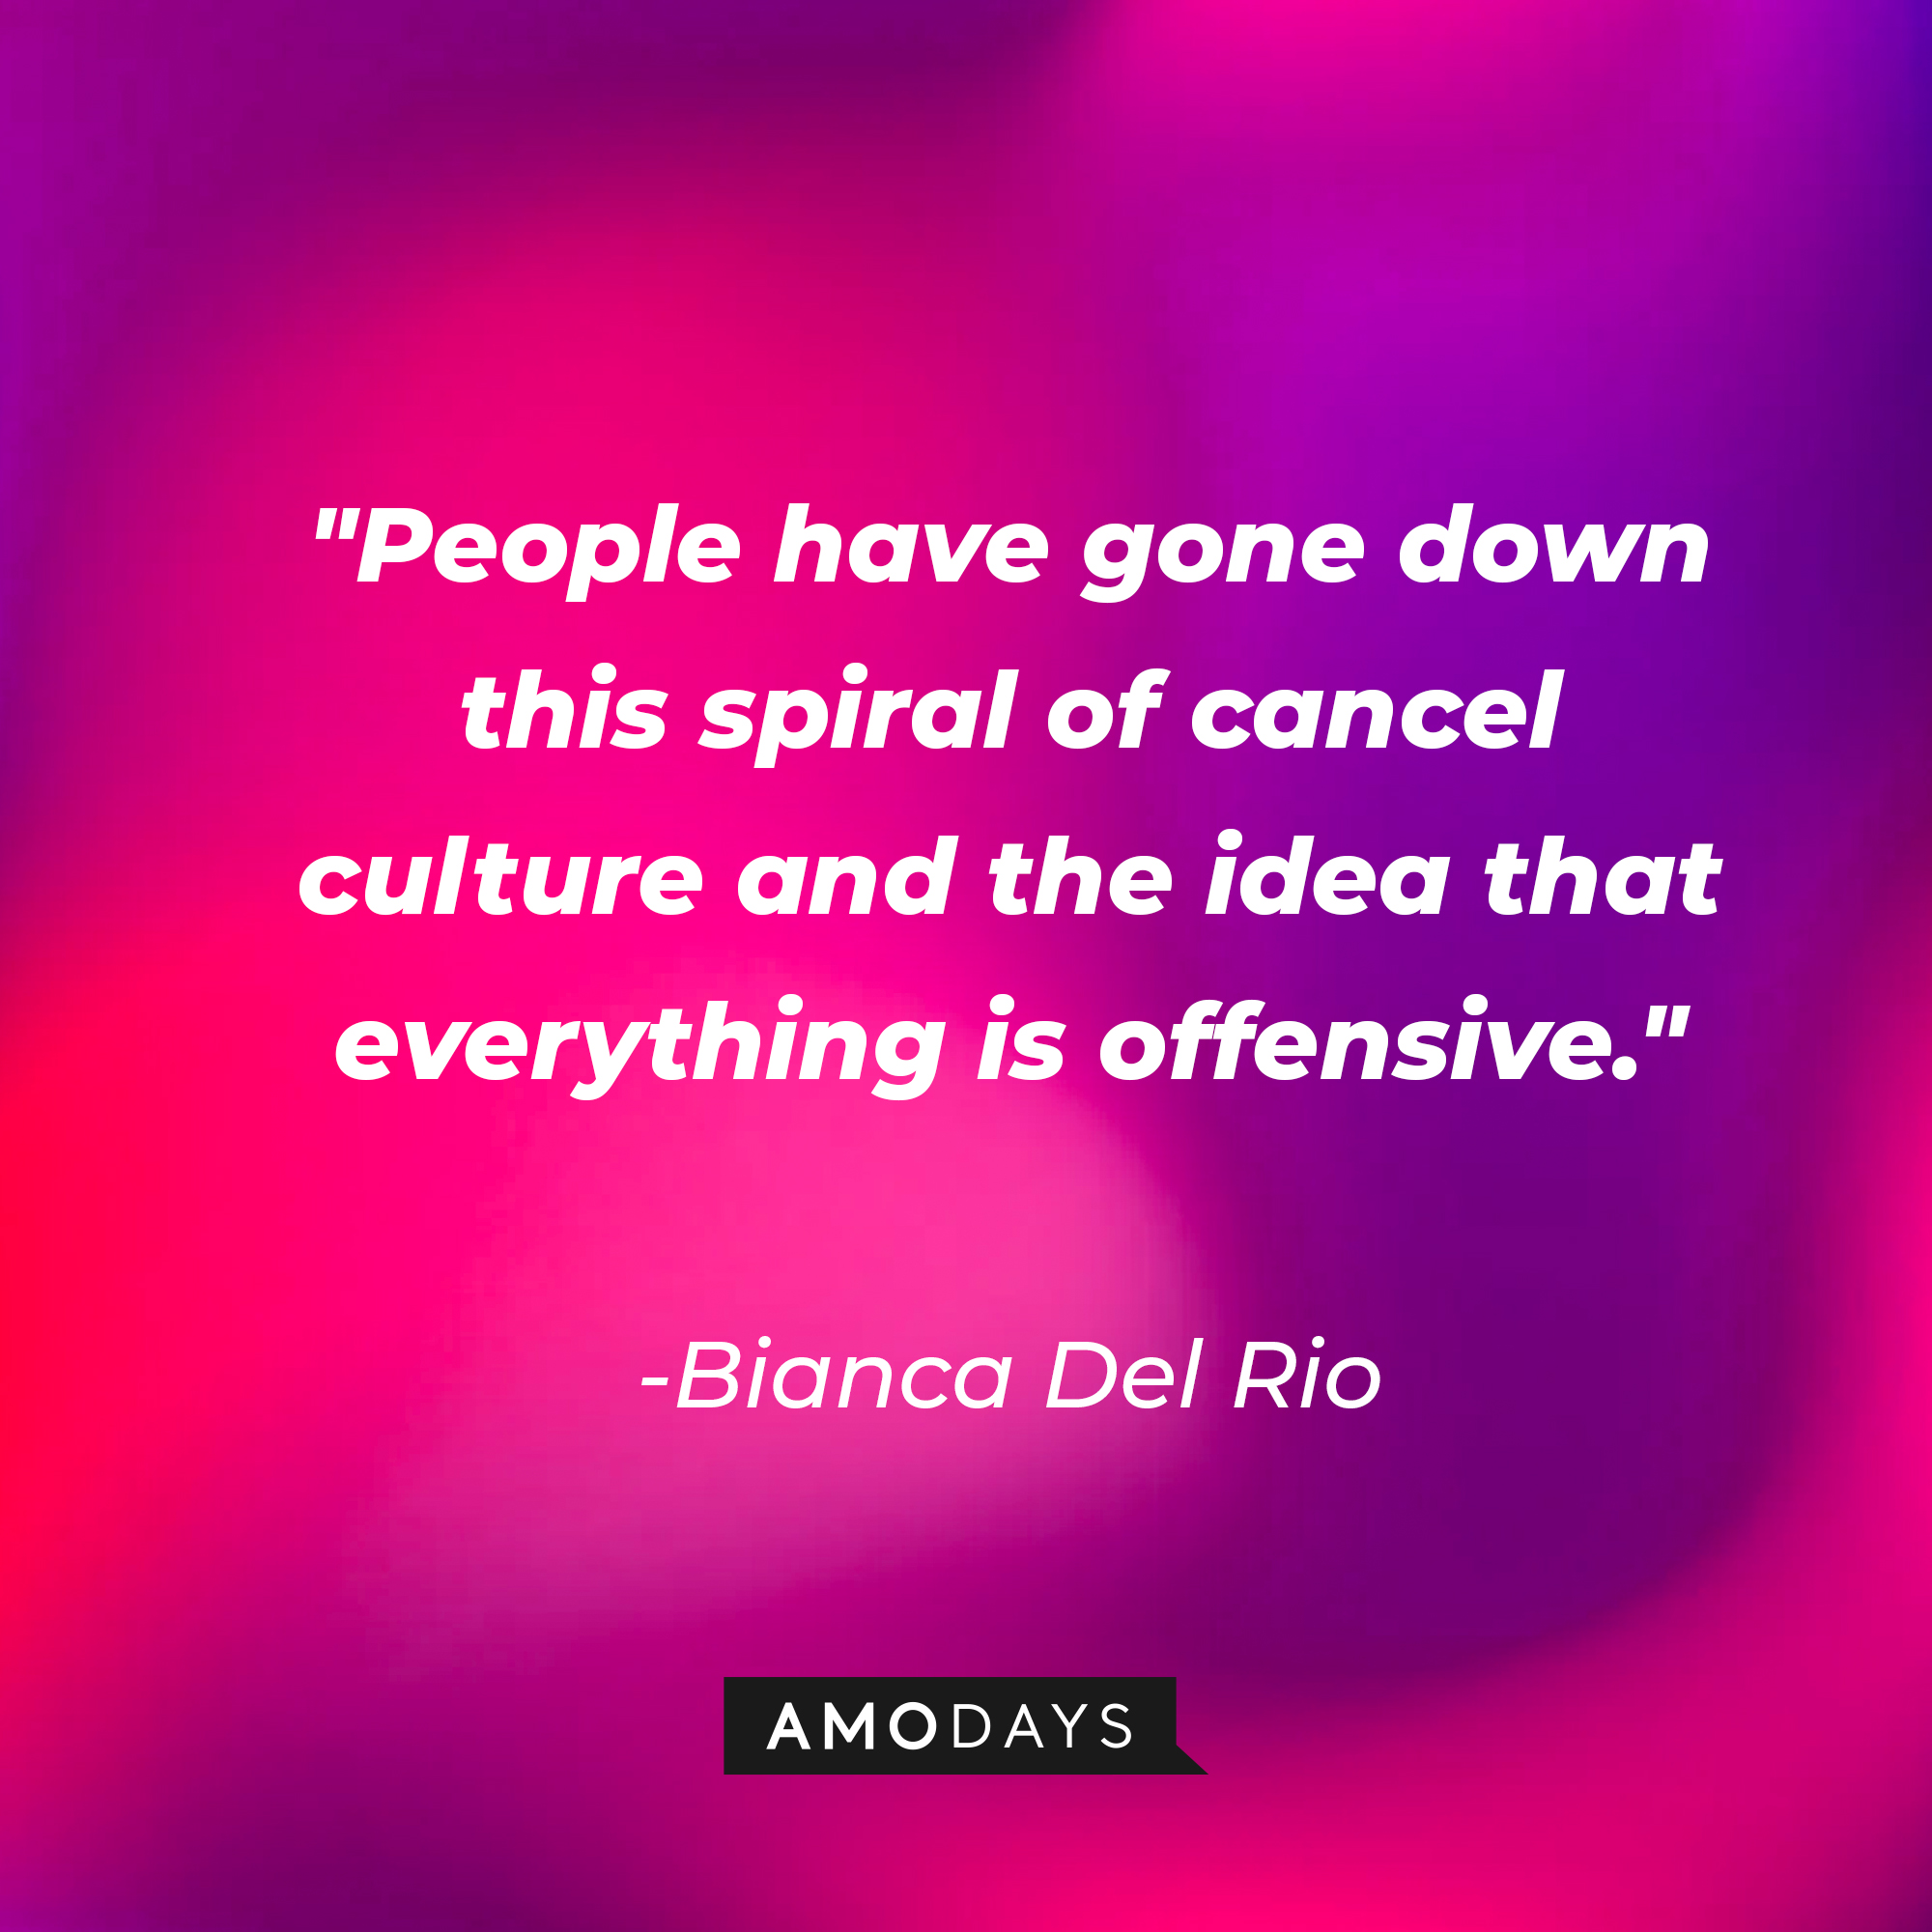 Bianca Del Rio's quote: "People have gone down this spiral of cancel culture and the idea that everything is offensive." | Source: AmoDays